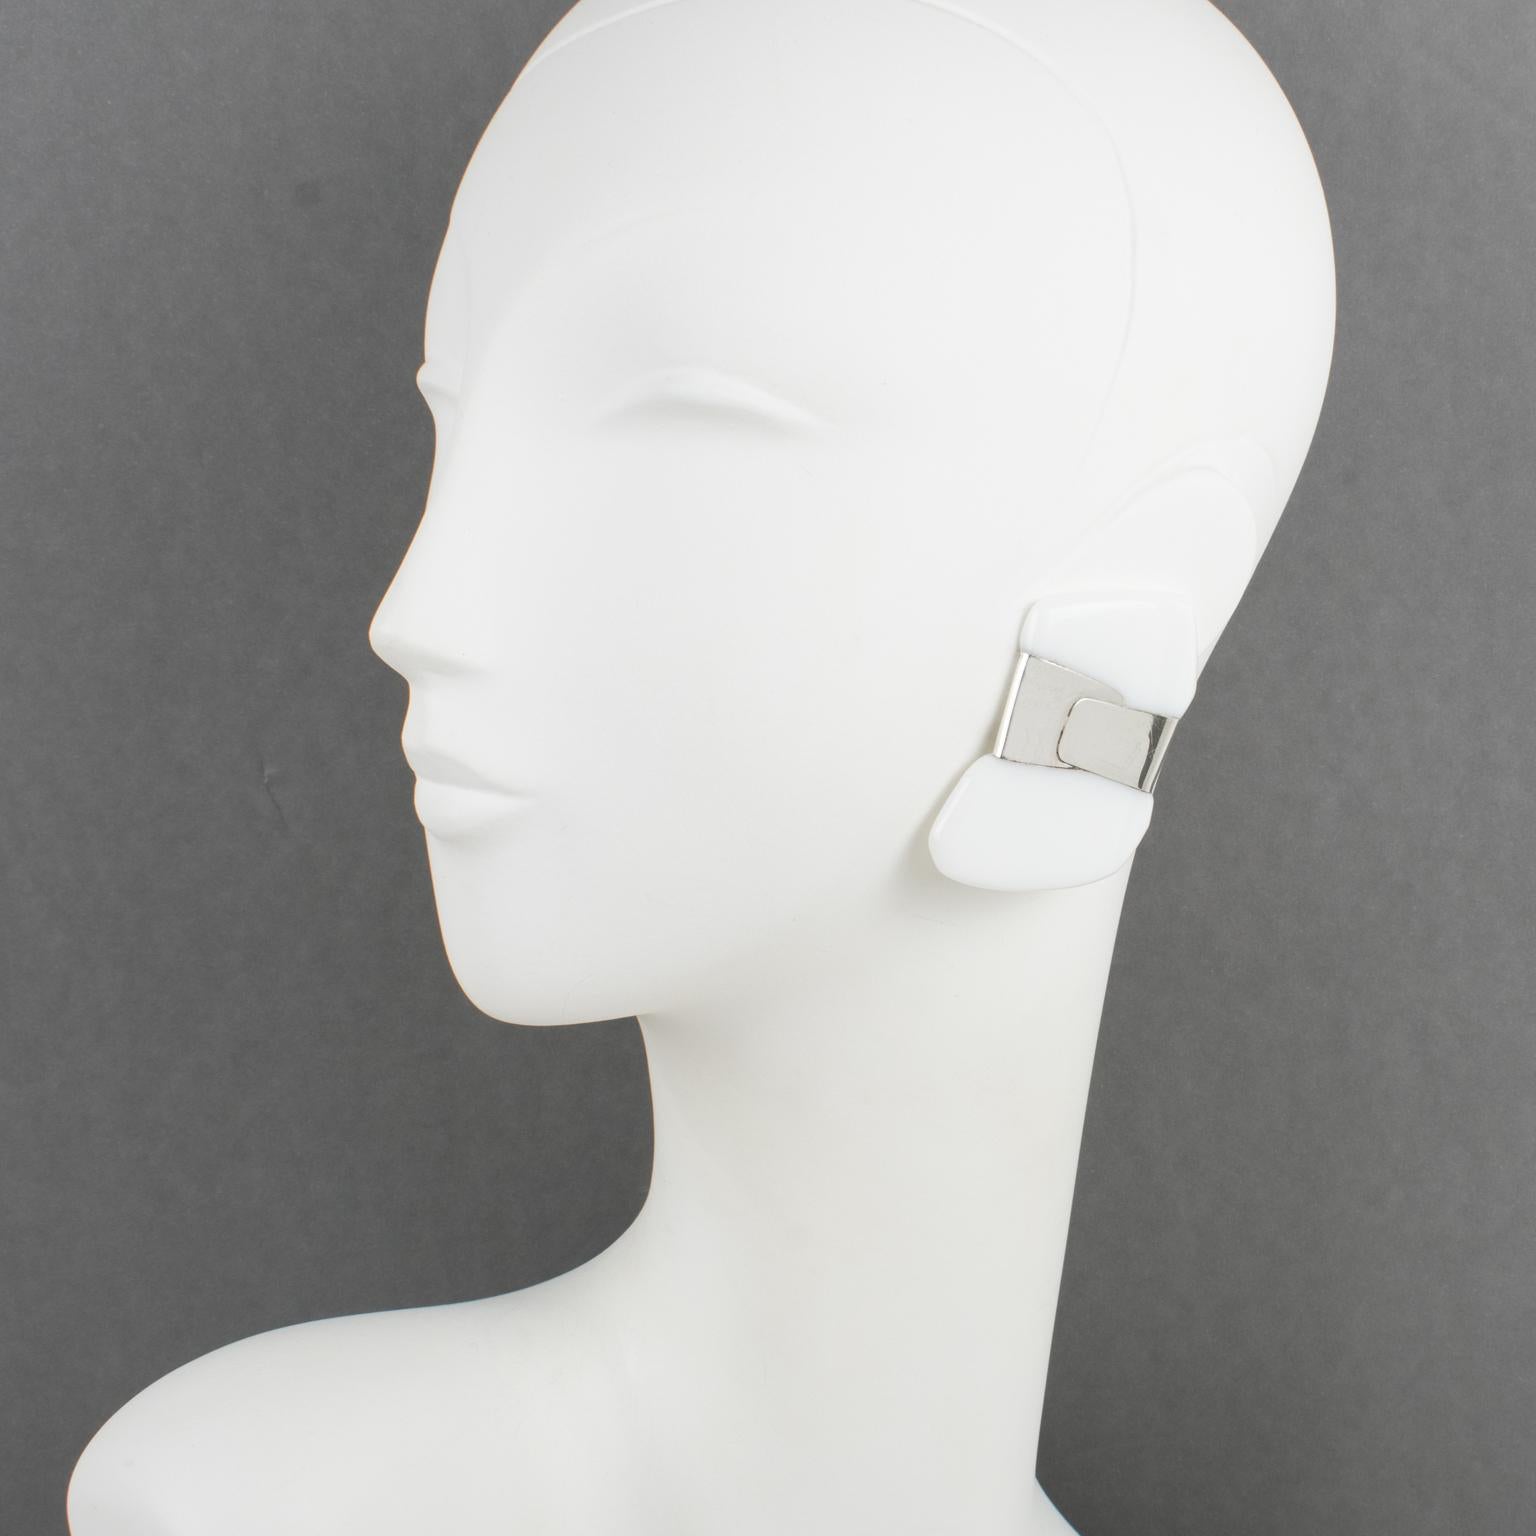 These elegant oversized Lucite clip-on earrings were designed by Anne and Frank Vigneri in the 1980s. The geometric, futuristic shape features a white Lucite element wrapped in a sterling silver band. The earrings are unsigned, but the specific